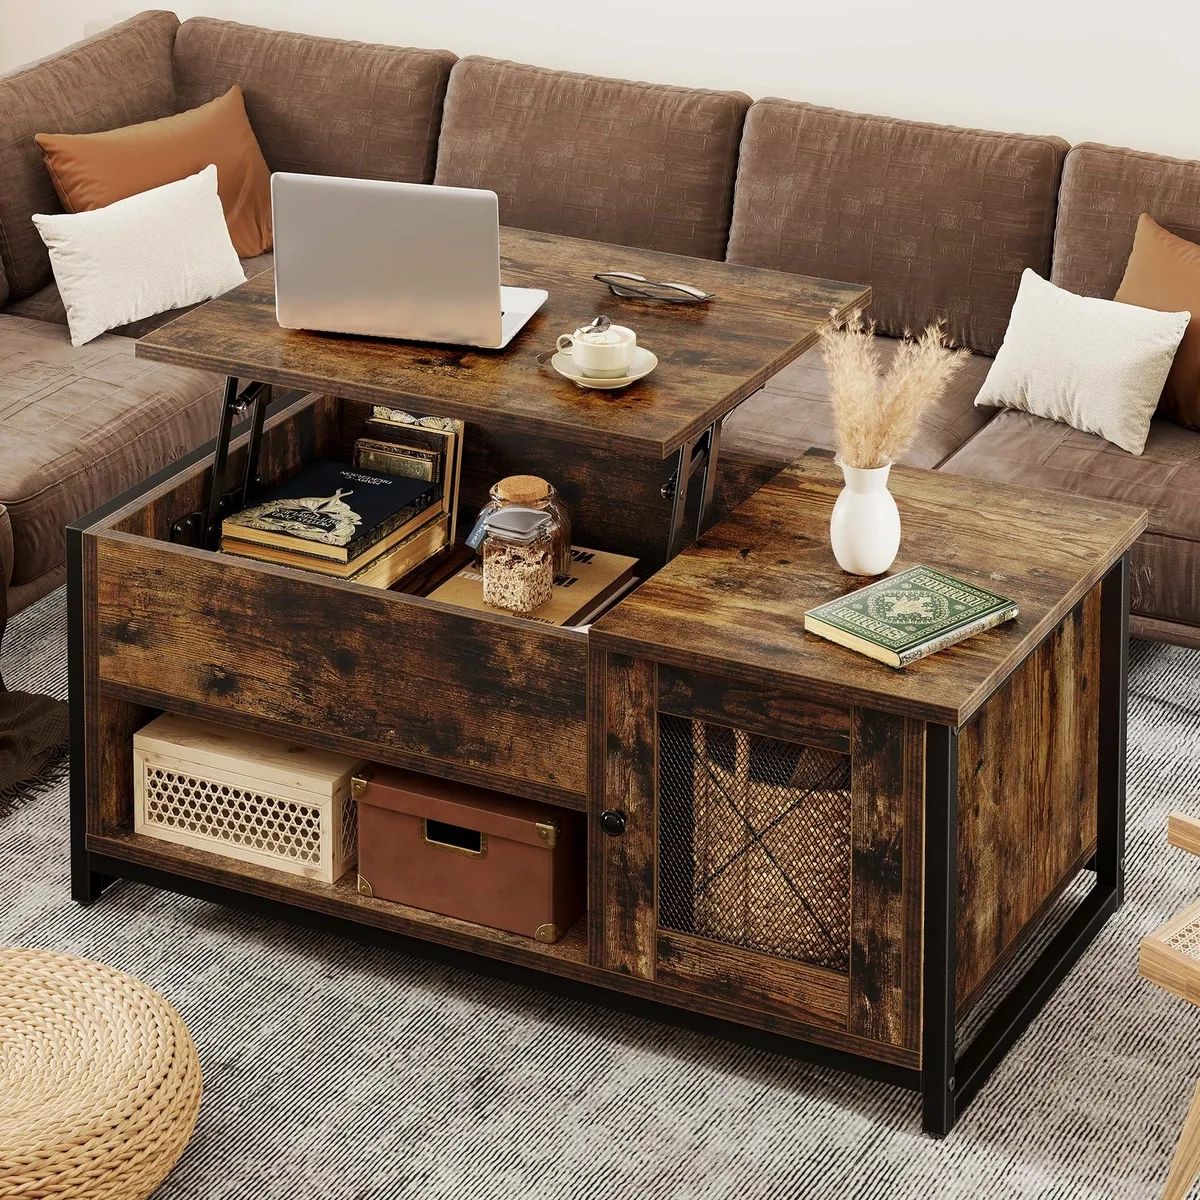 Farmhouse Lift Top Coffee Table With Hidden Compartment And Storage Shelf  Brown | Ebay Inside Farmhouse Lift Top Tables (View 8 of 15)